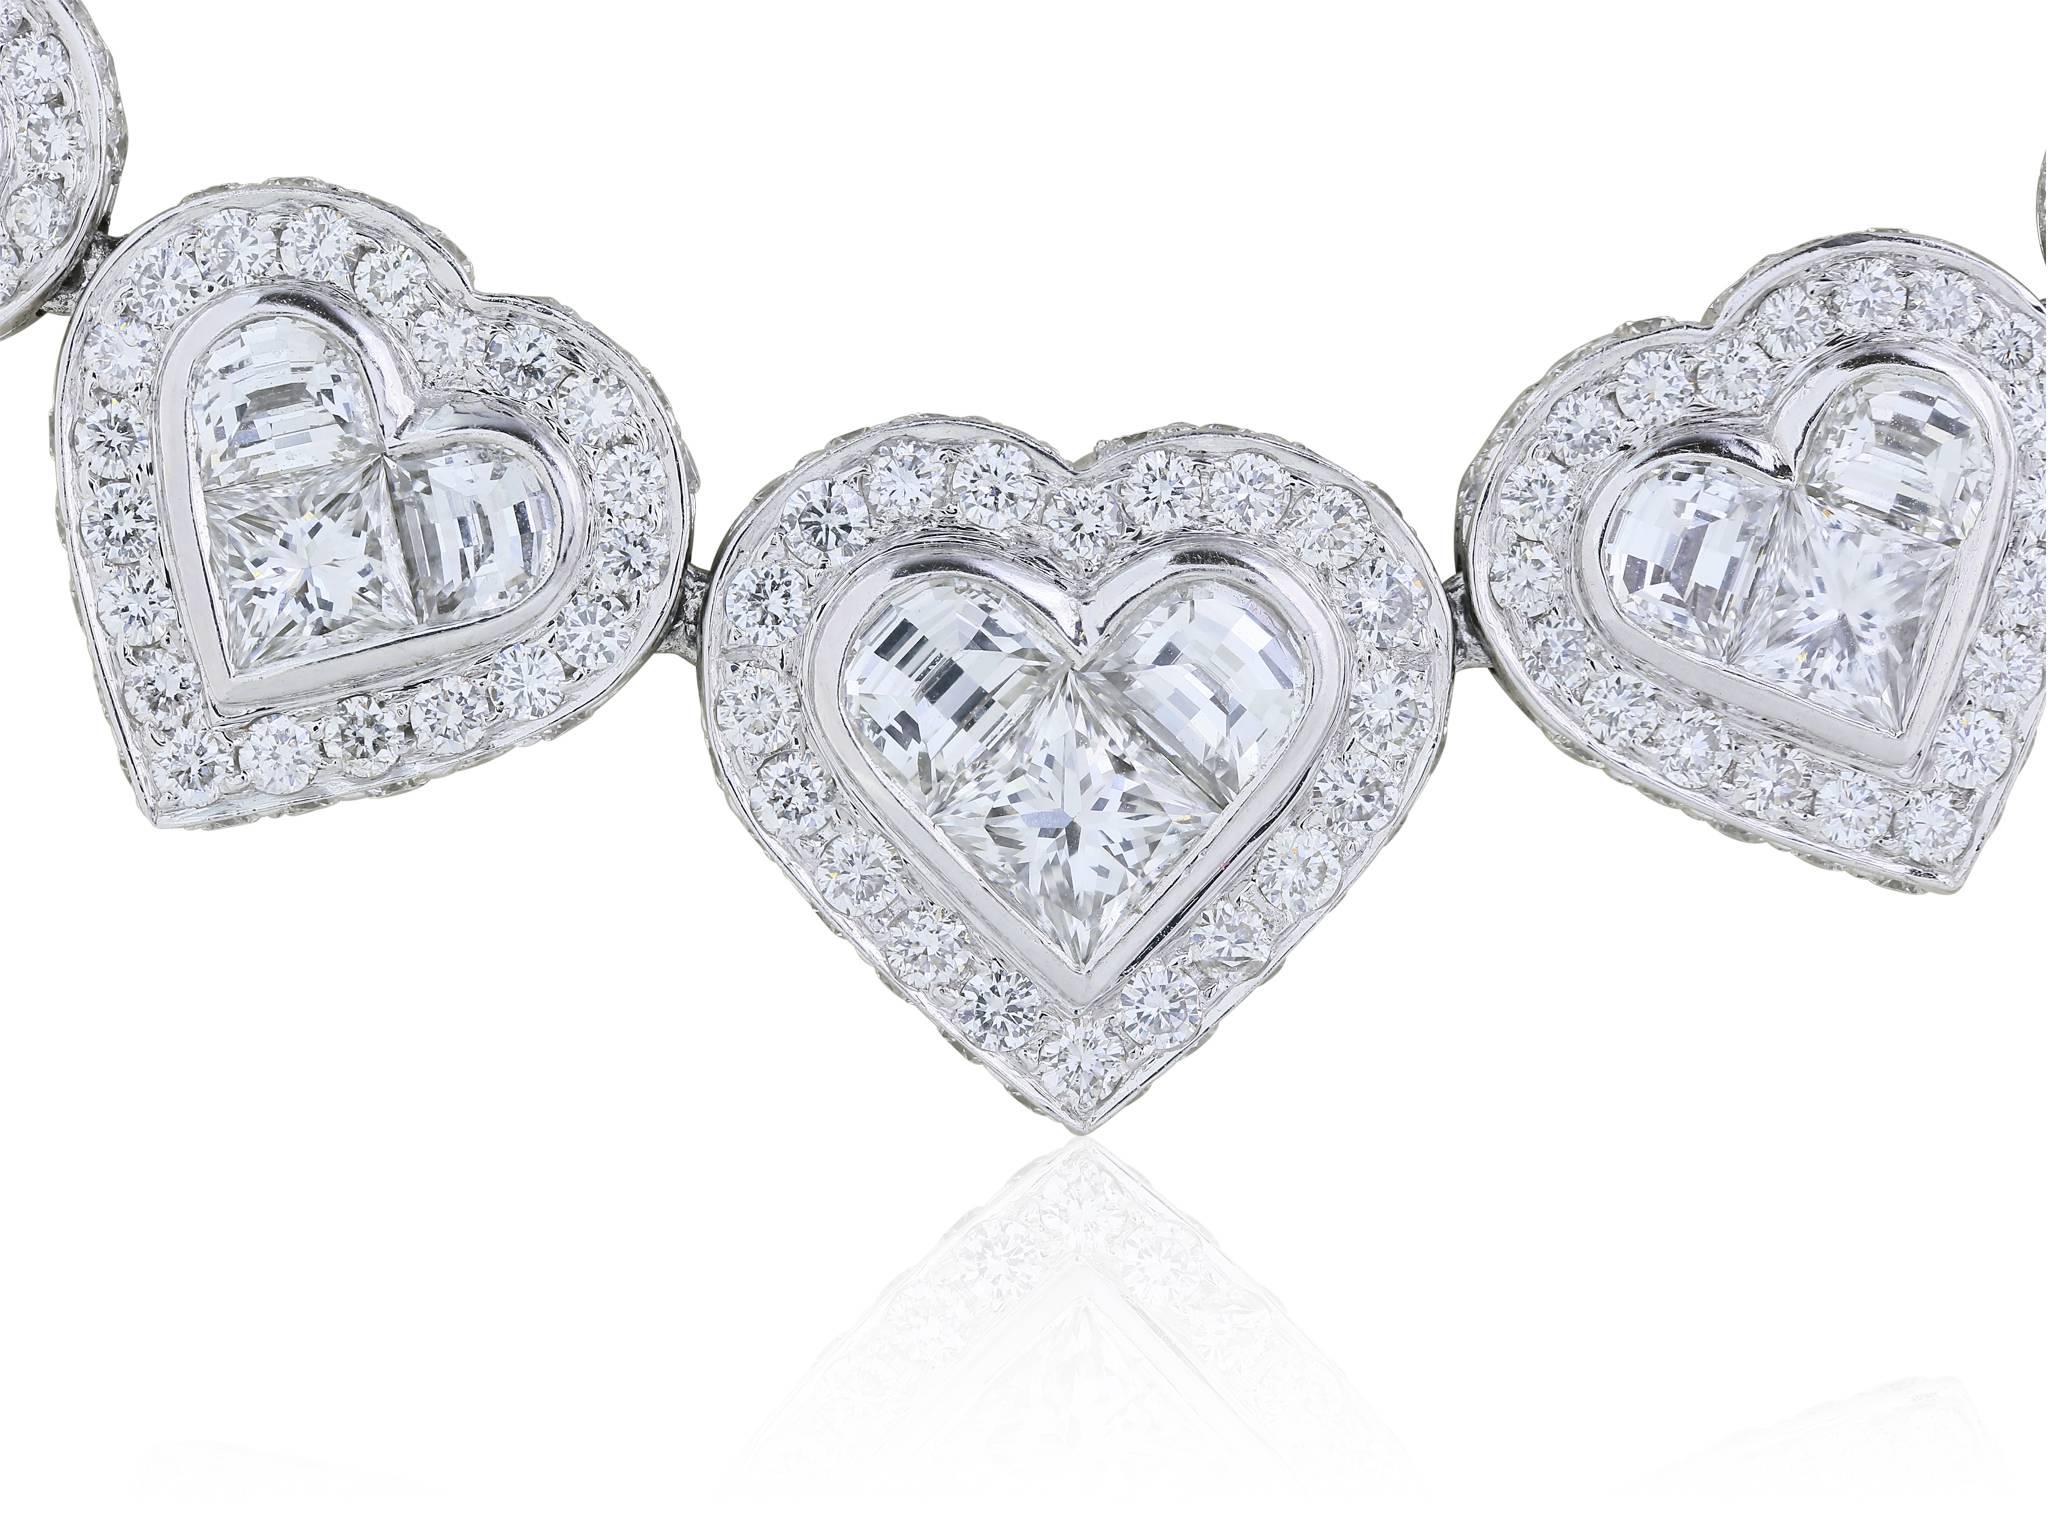 Platinum graduated heart shaped diamond Riviera necklace consisting of princess, round, and half moon cut diamonds with a total weight of 35.03 carats with a color and clarity of F VS1-VS2 respectively.

